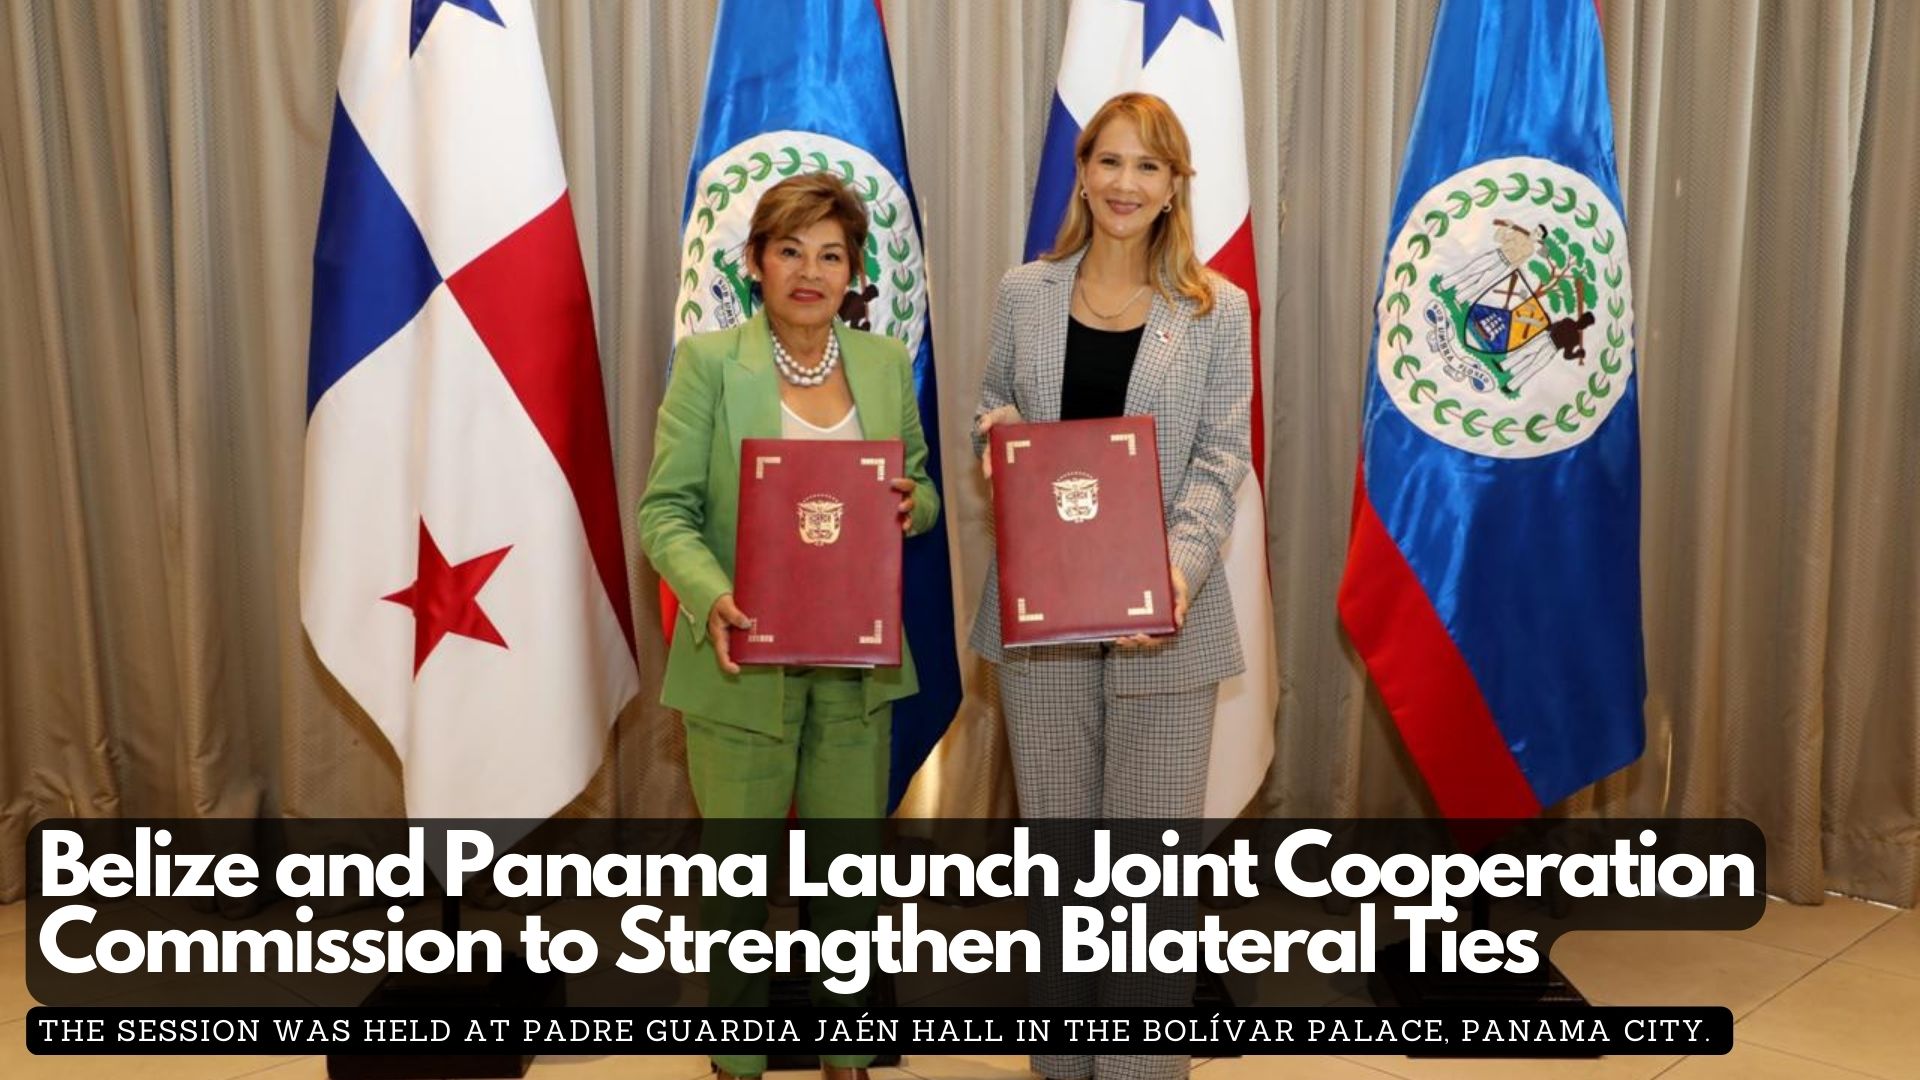 Belize and Panama Launch Joint Cooperation Commission to Strengthen Bilateral Ties